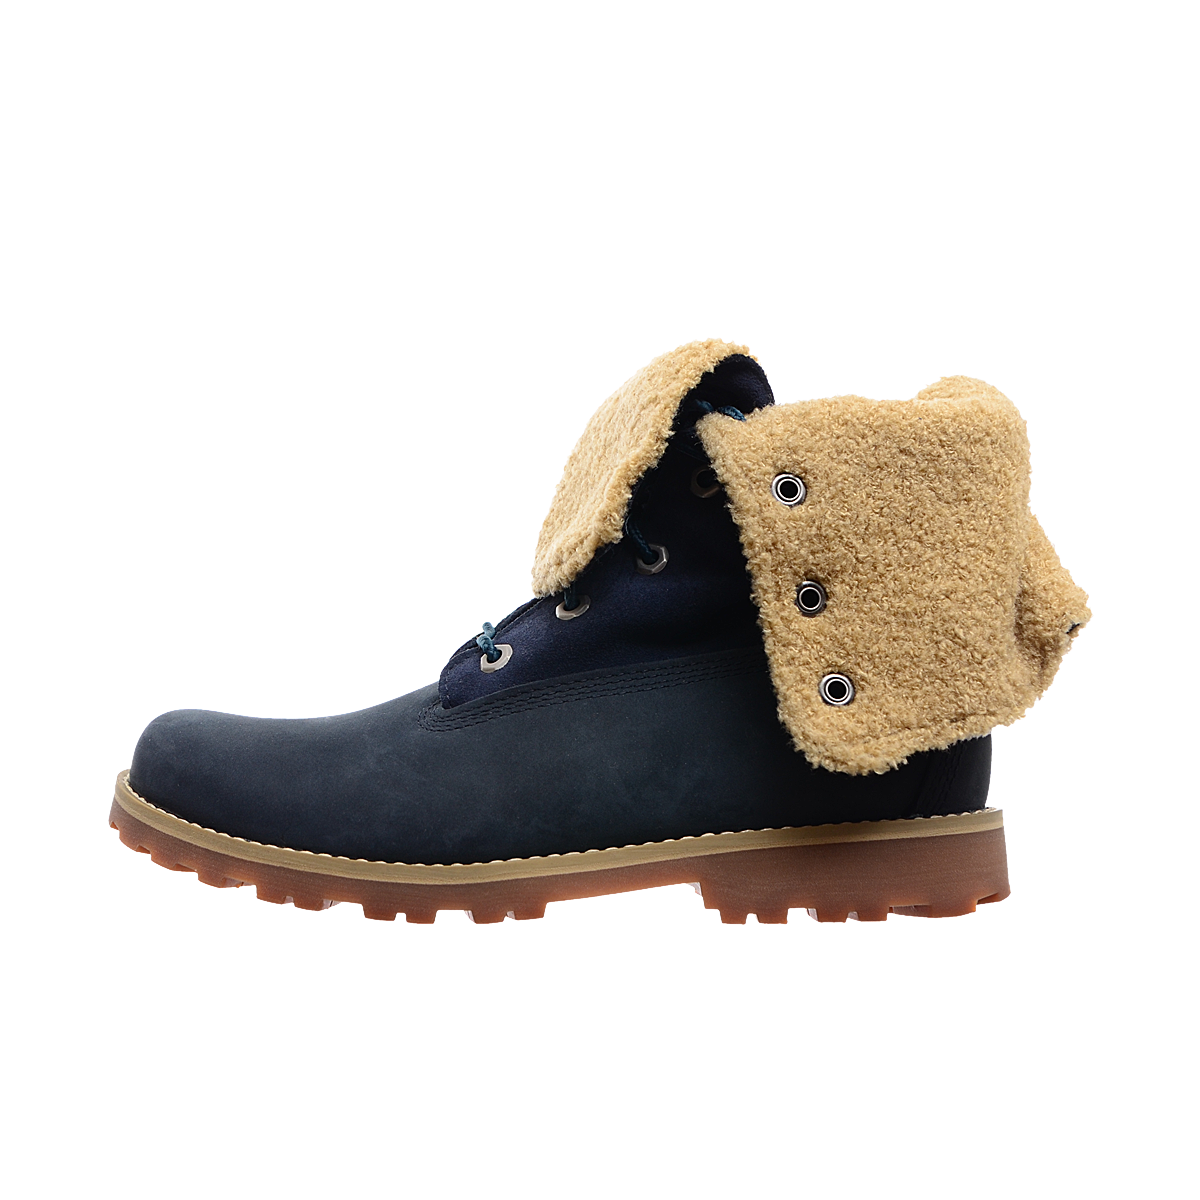 6 In WP Shearling Boot Boot imagine noua